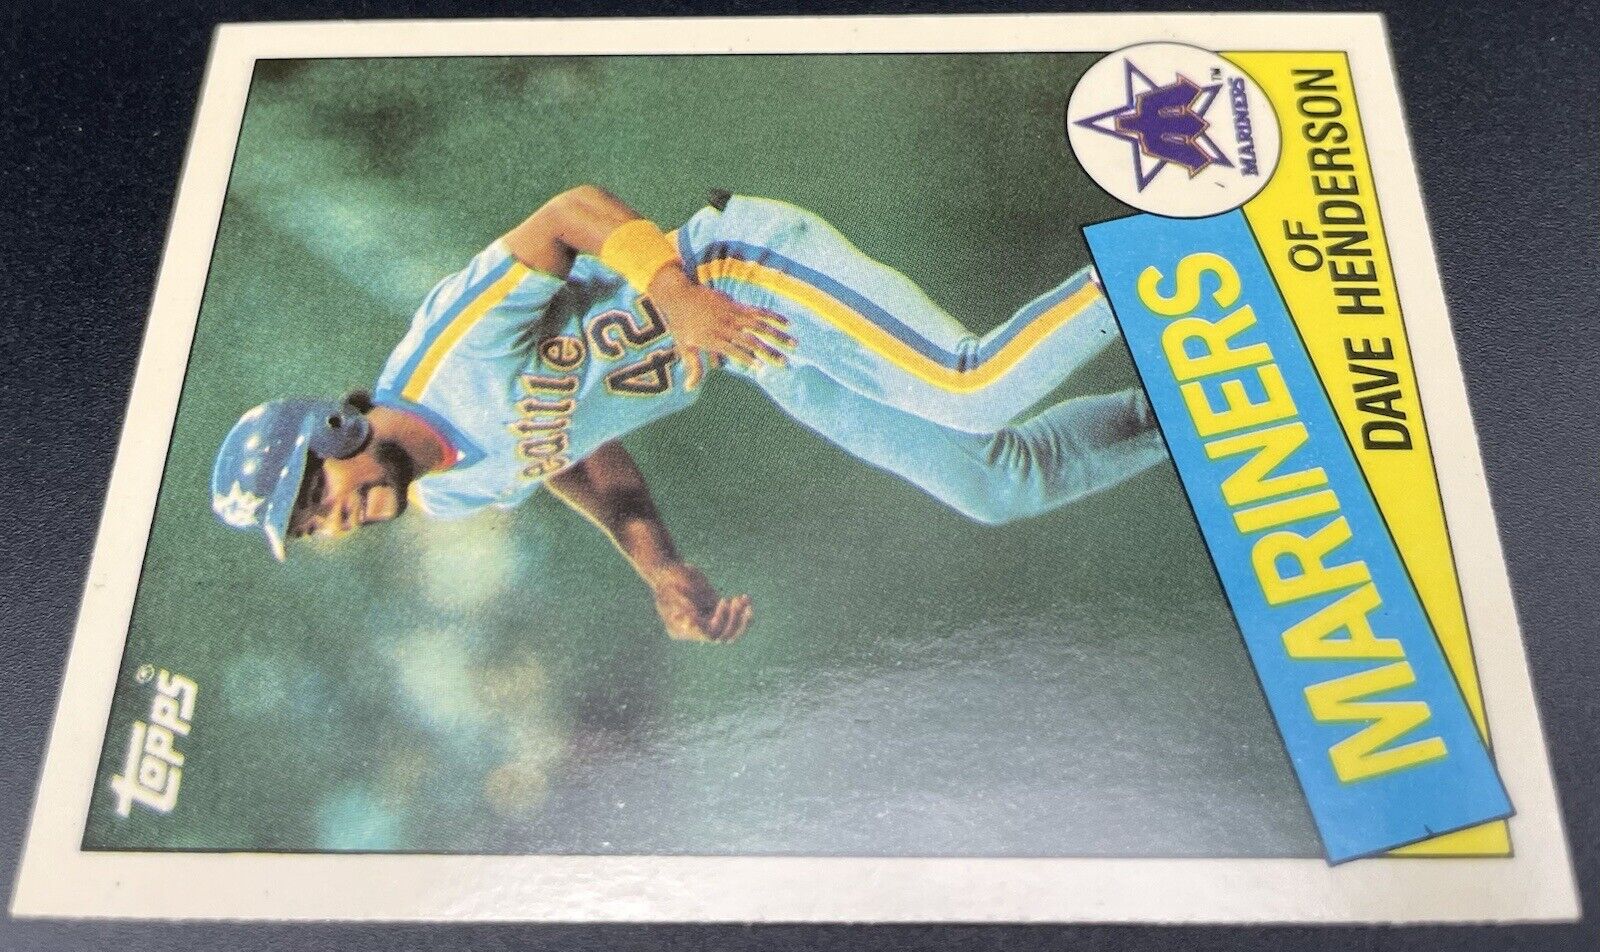 Dave Henderson 1985 Topps Tiffany Seattle Mariners #344 ⚾